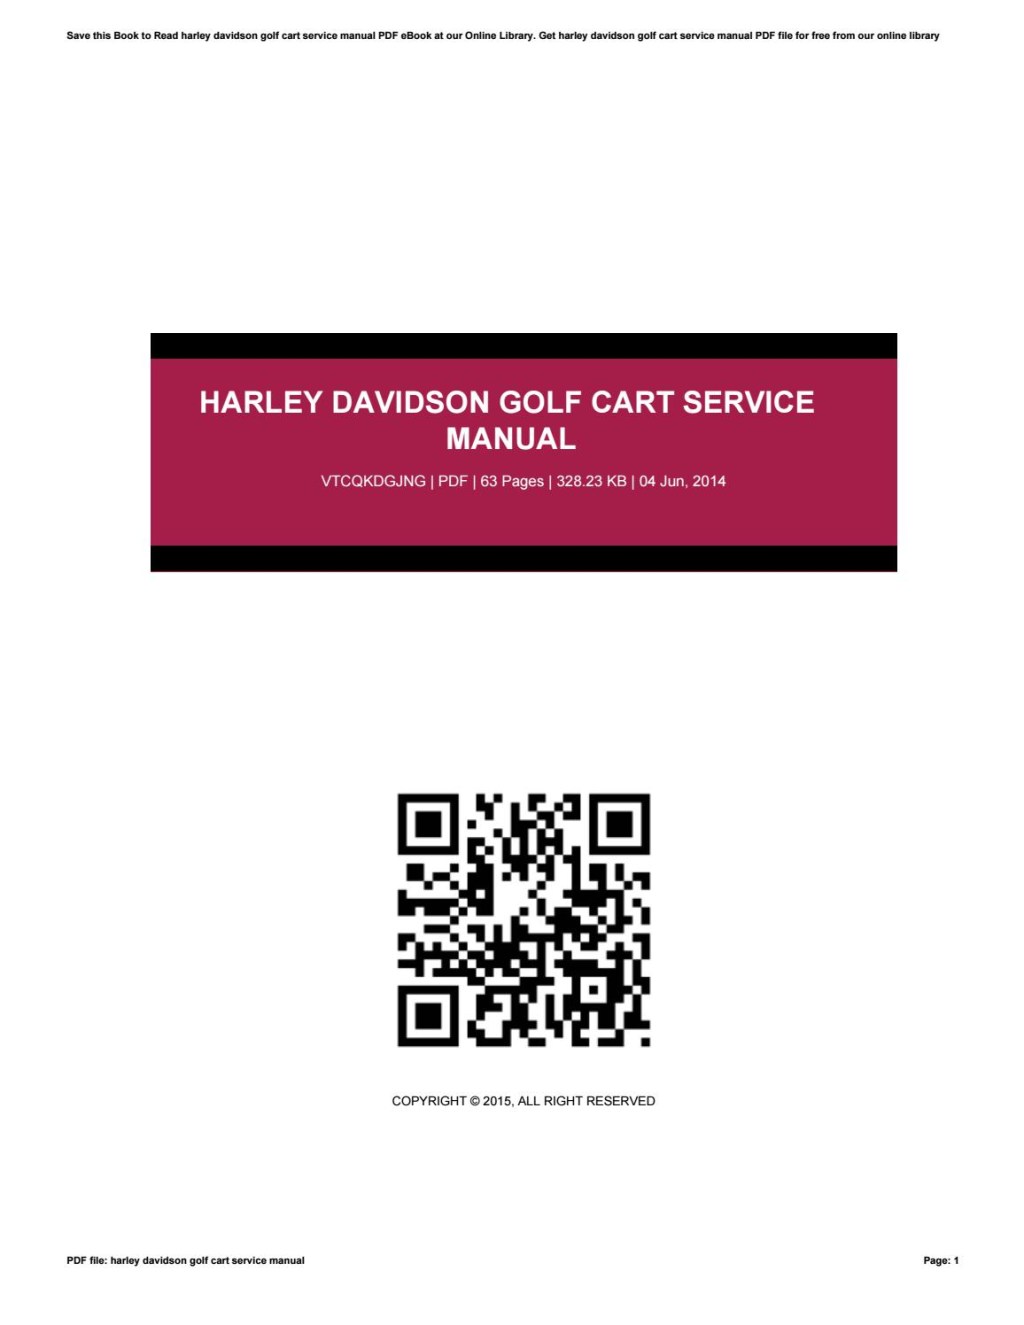 Picture of: Harley davidson golf cart service manual by Ruby Moore – Issuu